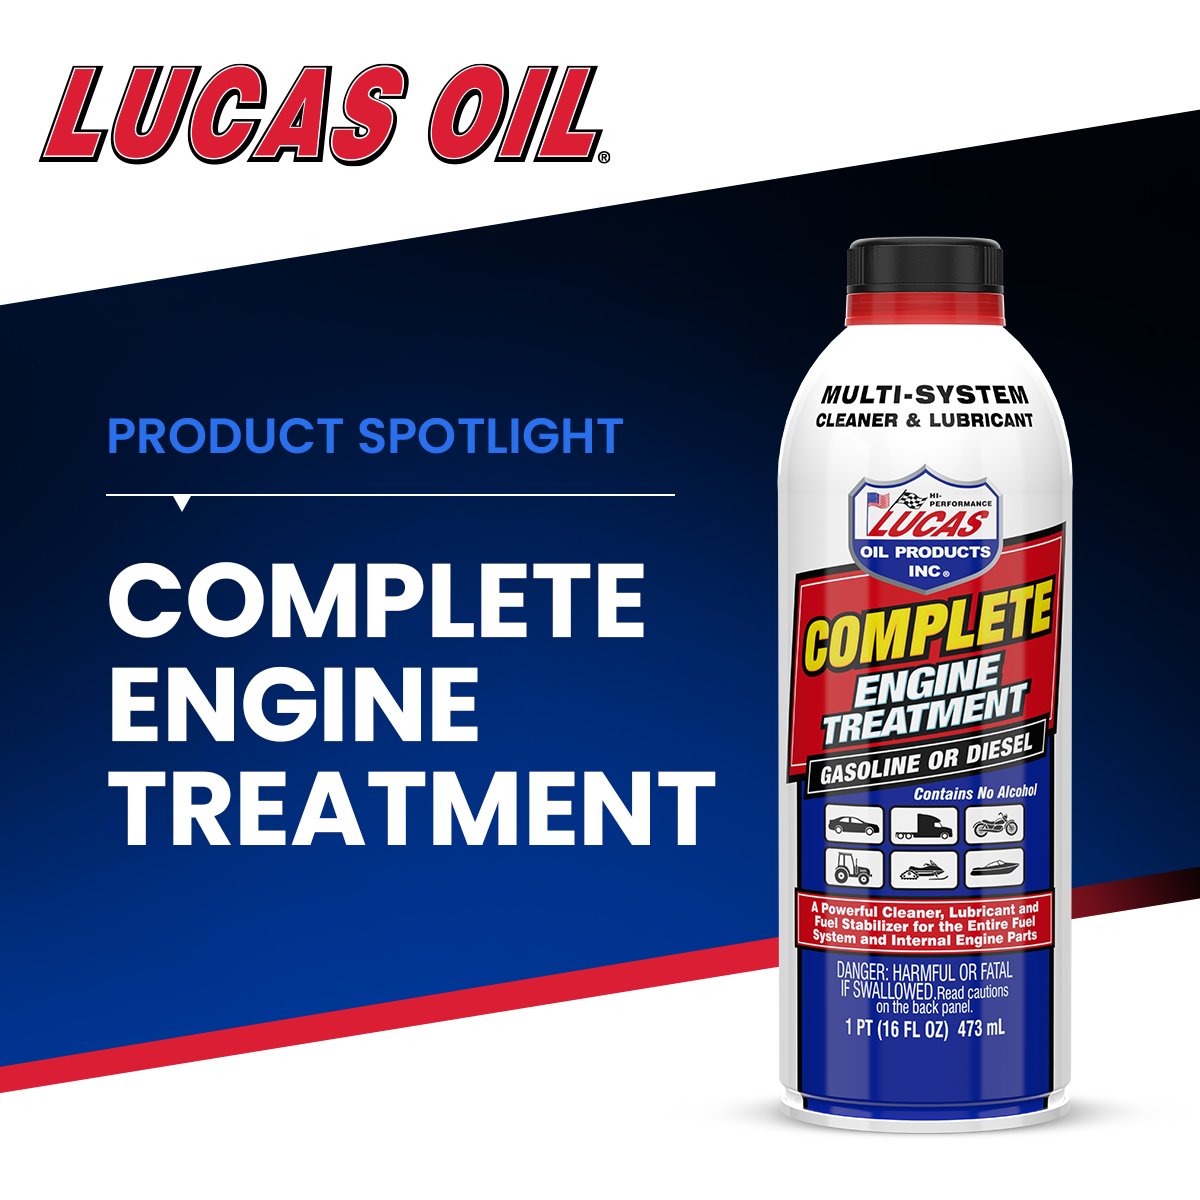 🤔 Not sure which additive to choose? We got you! 💪 Our Complete Engine Treatment is a formula that can be used in both fuel systems AND engines, cleaning fuel system components, improving engine cleanliness, and extending oil life! 🔗 All benefits: lucasoil.com/product/comple…